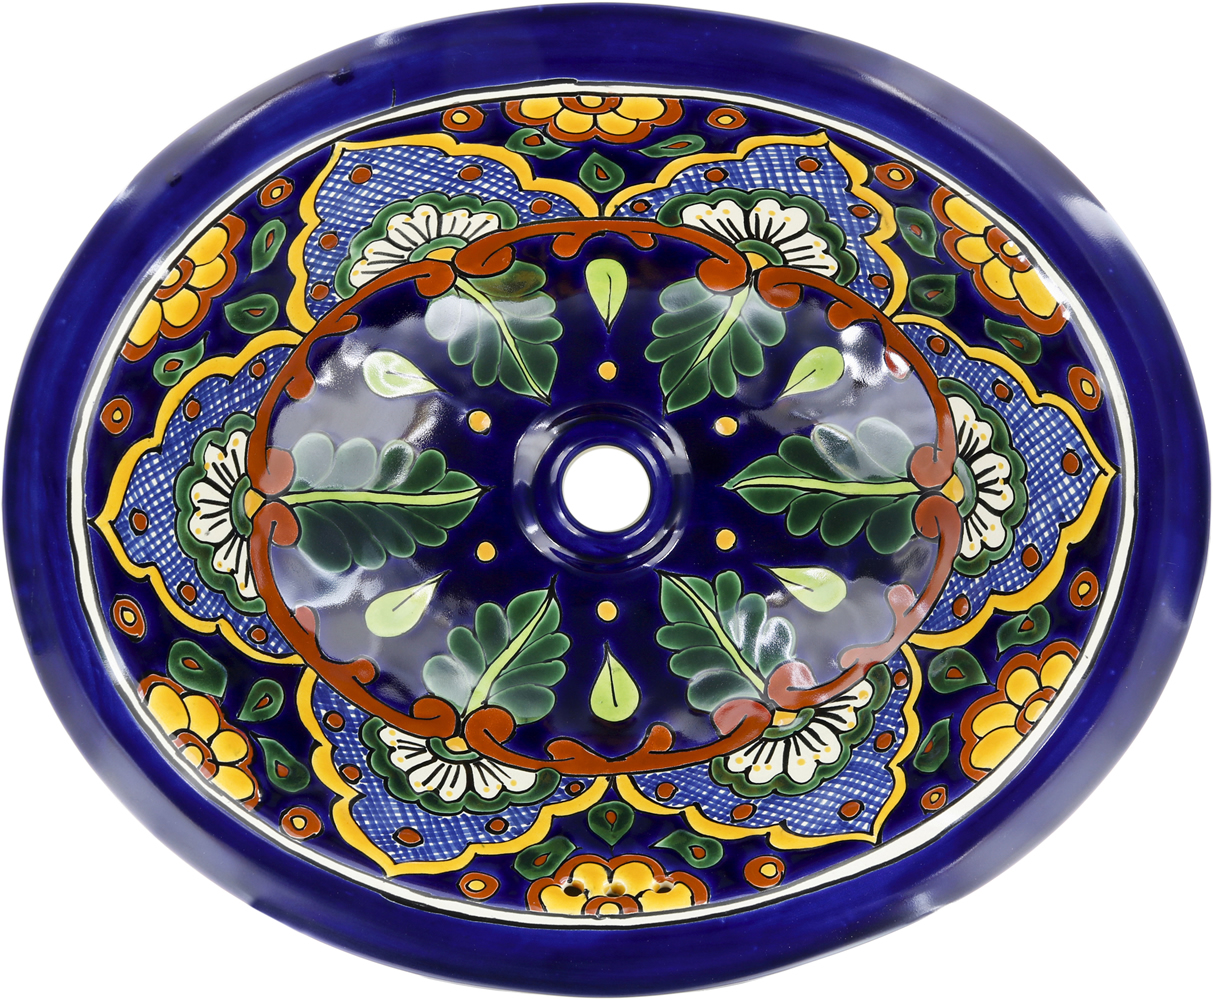 Details about   Mexican Talavera Sink Oval Drop in Handcrafted ceramic LM3